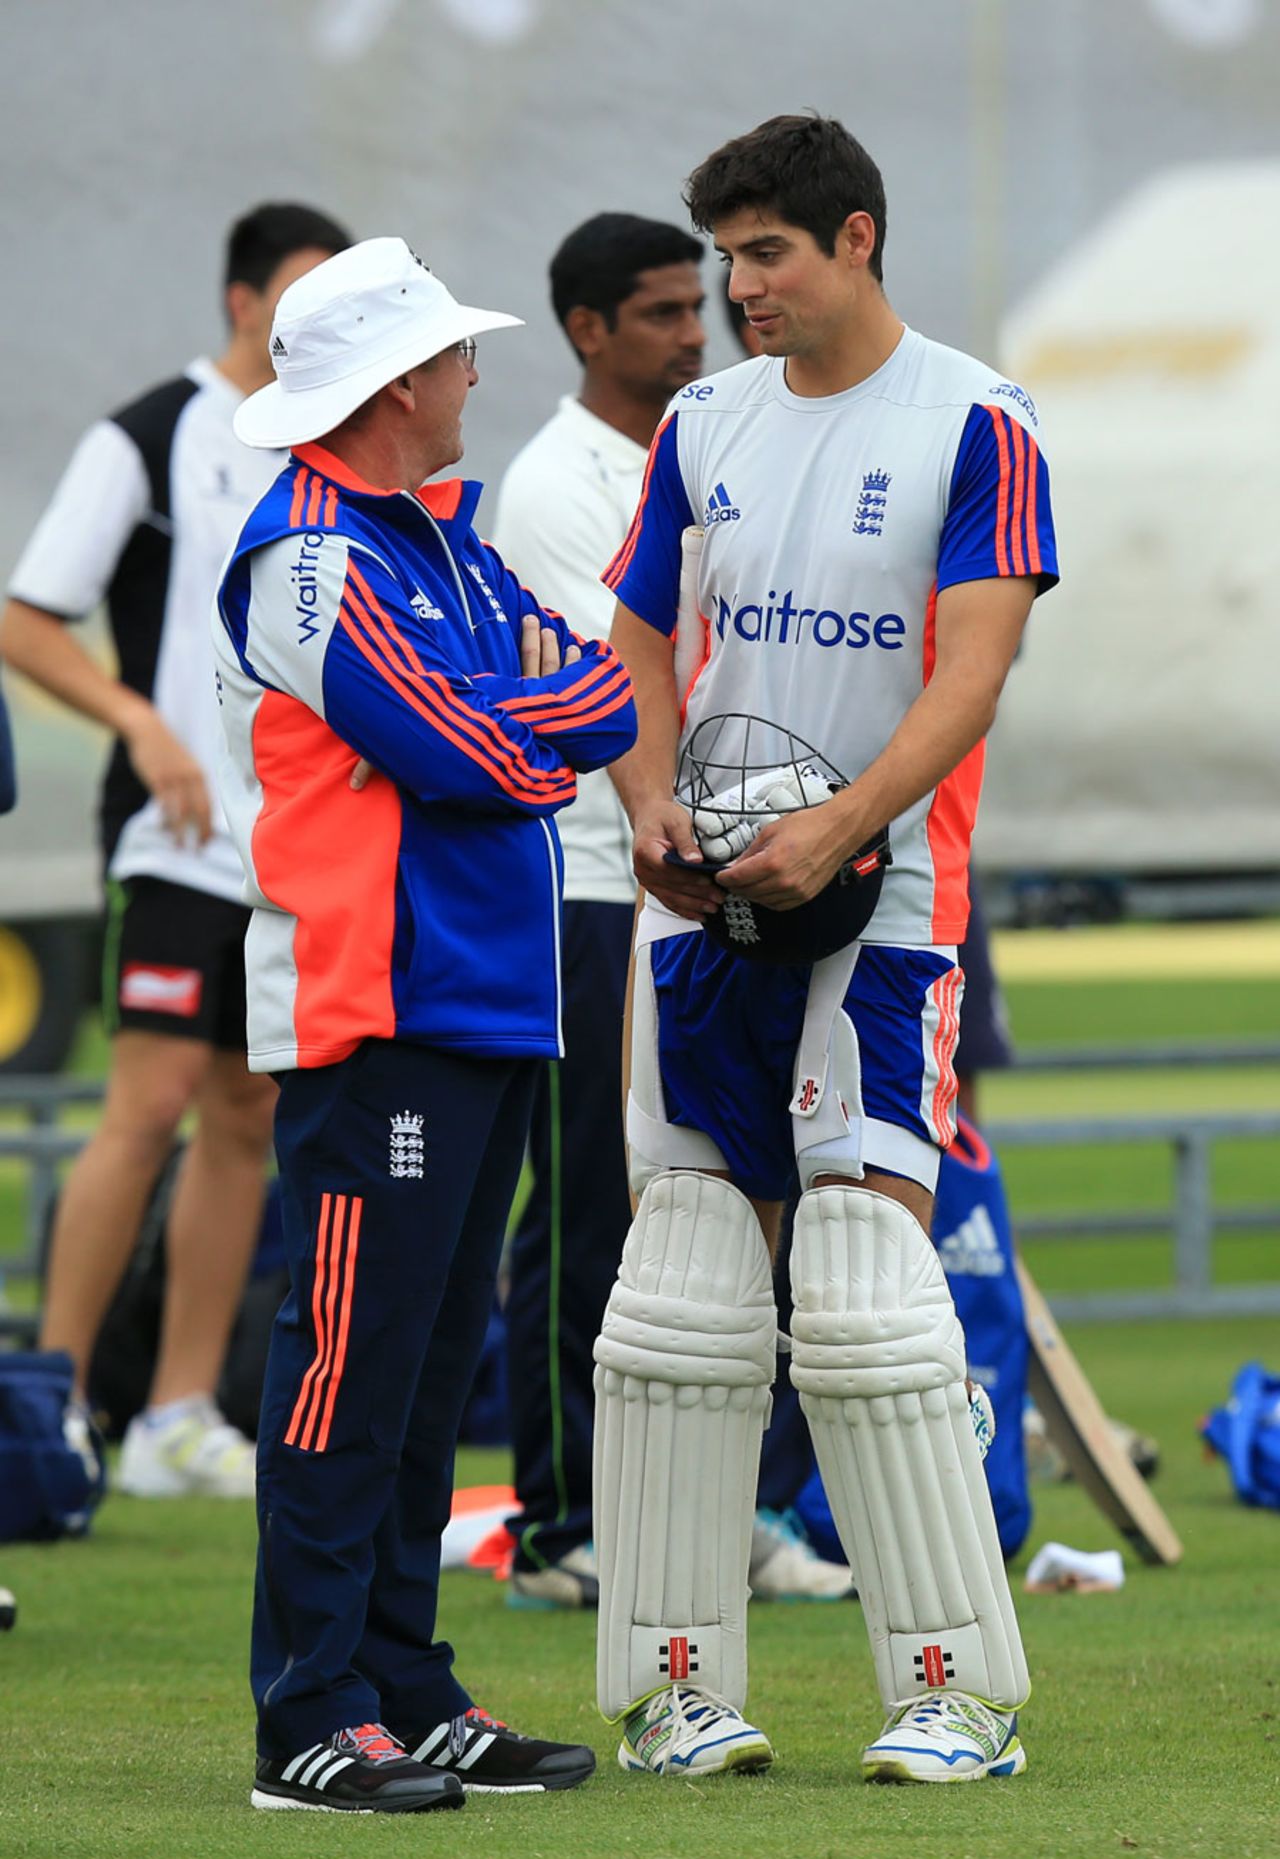 Trevor Bayliss and Alastair Cook are reportedly working well together, Lord's July 15, 2015